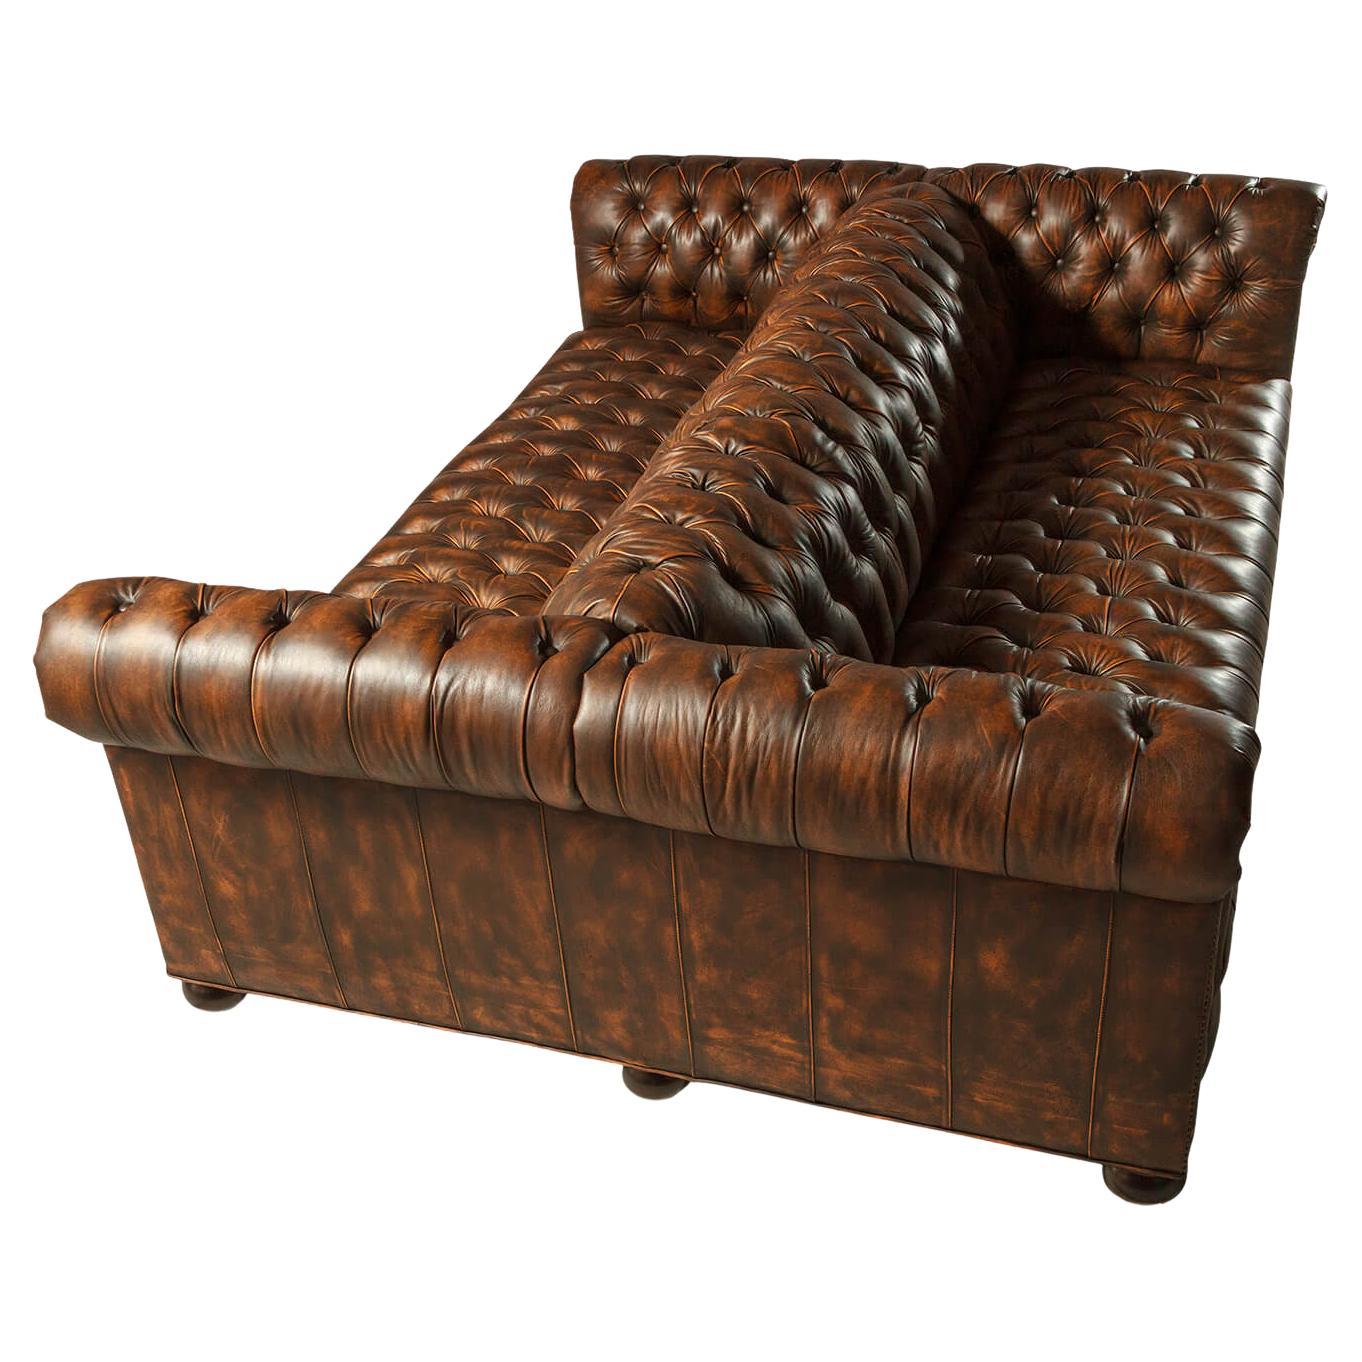 This leather sofa is upholstered in our high-grade Newport Toffee leather. With tightly tufted backrests and seat cushions with high-density foam, with natural finish brass nailhead details raised on bun feet. 

With our uniquely treated